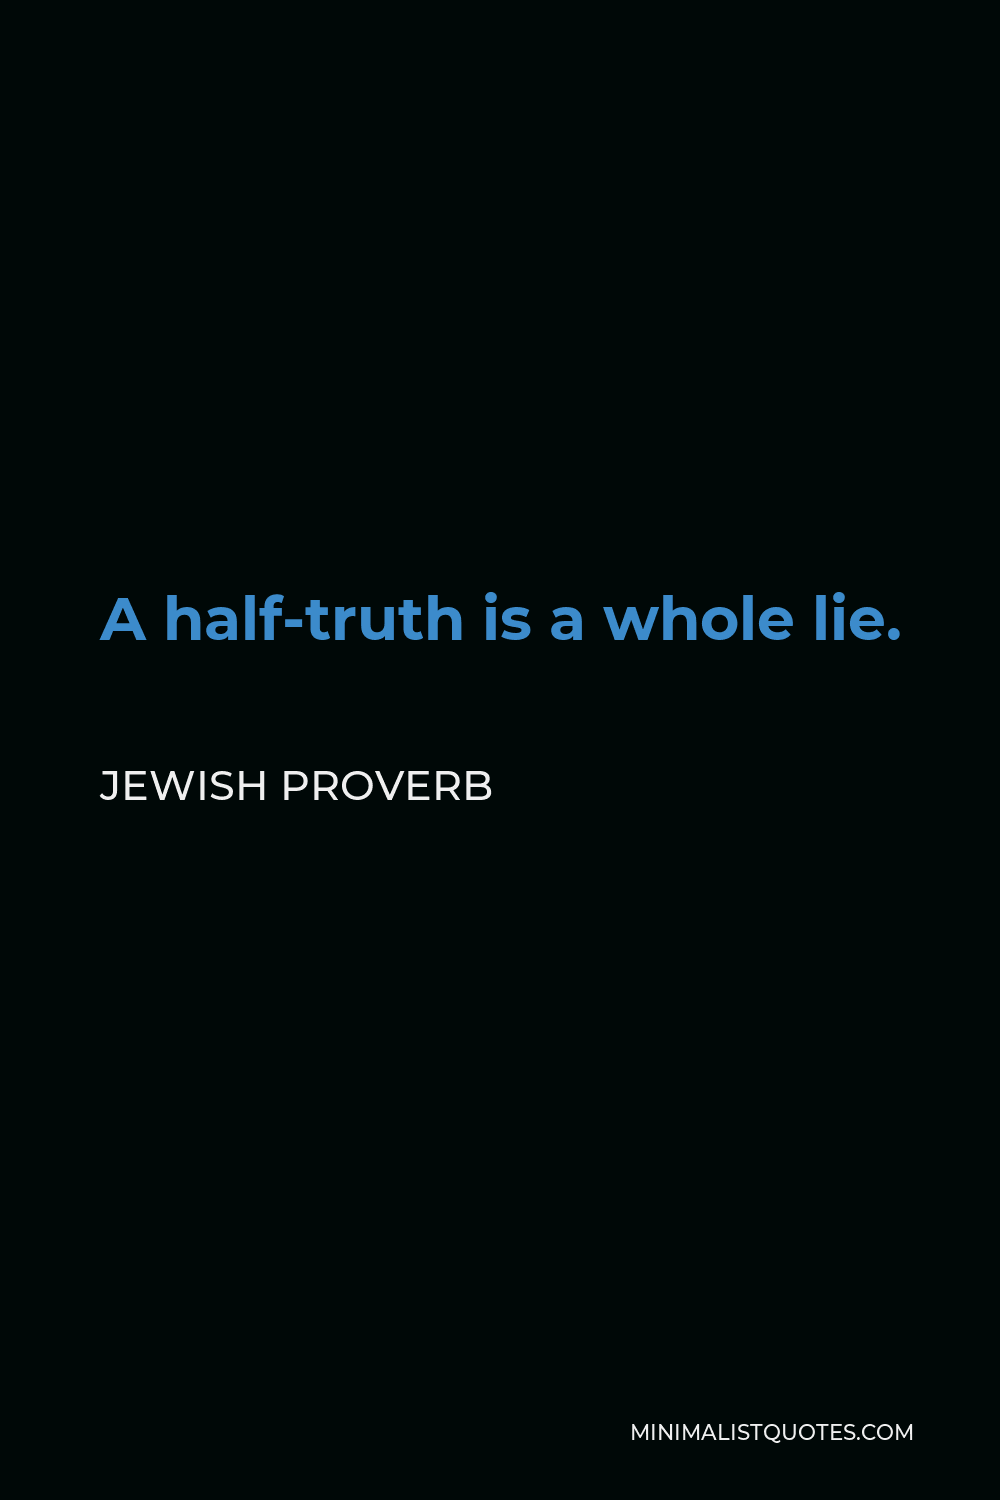 Jewish Proverb Quote - A half-truth is a whole lie.